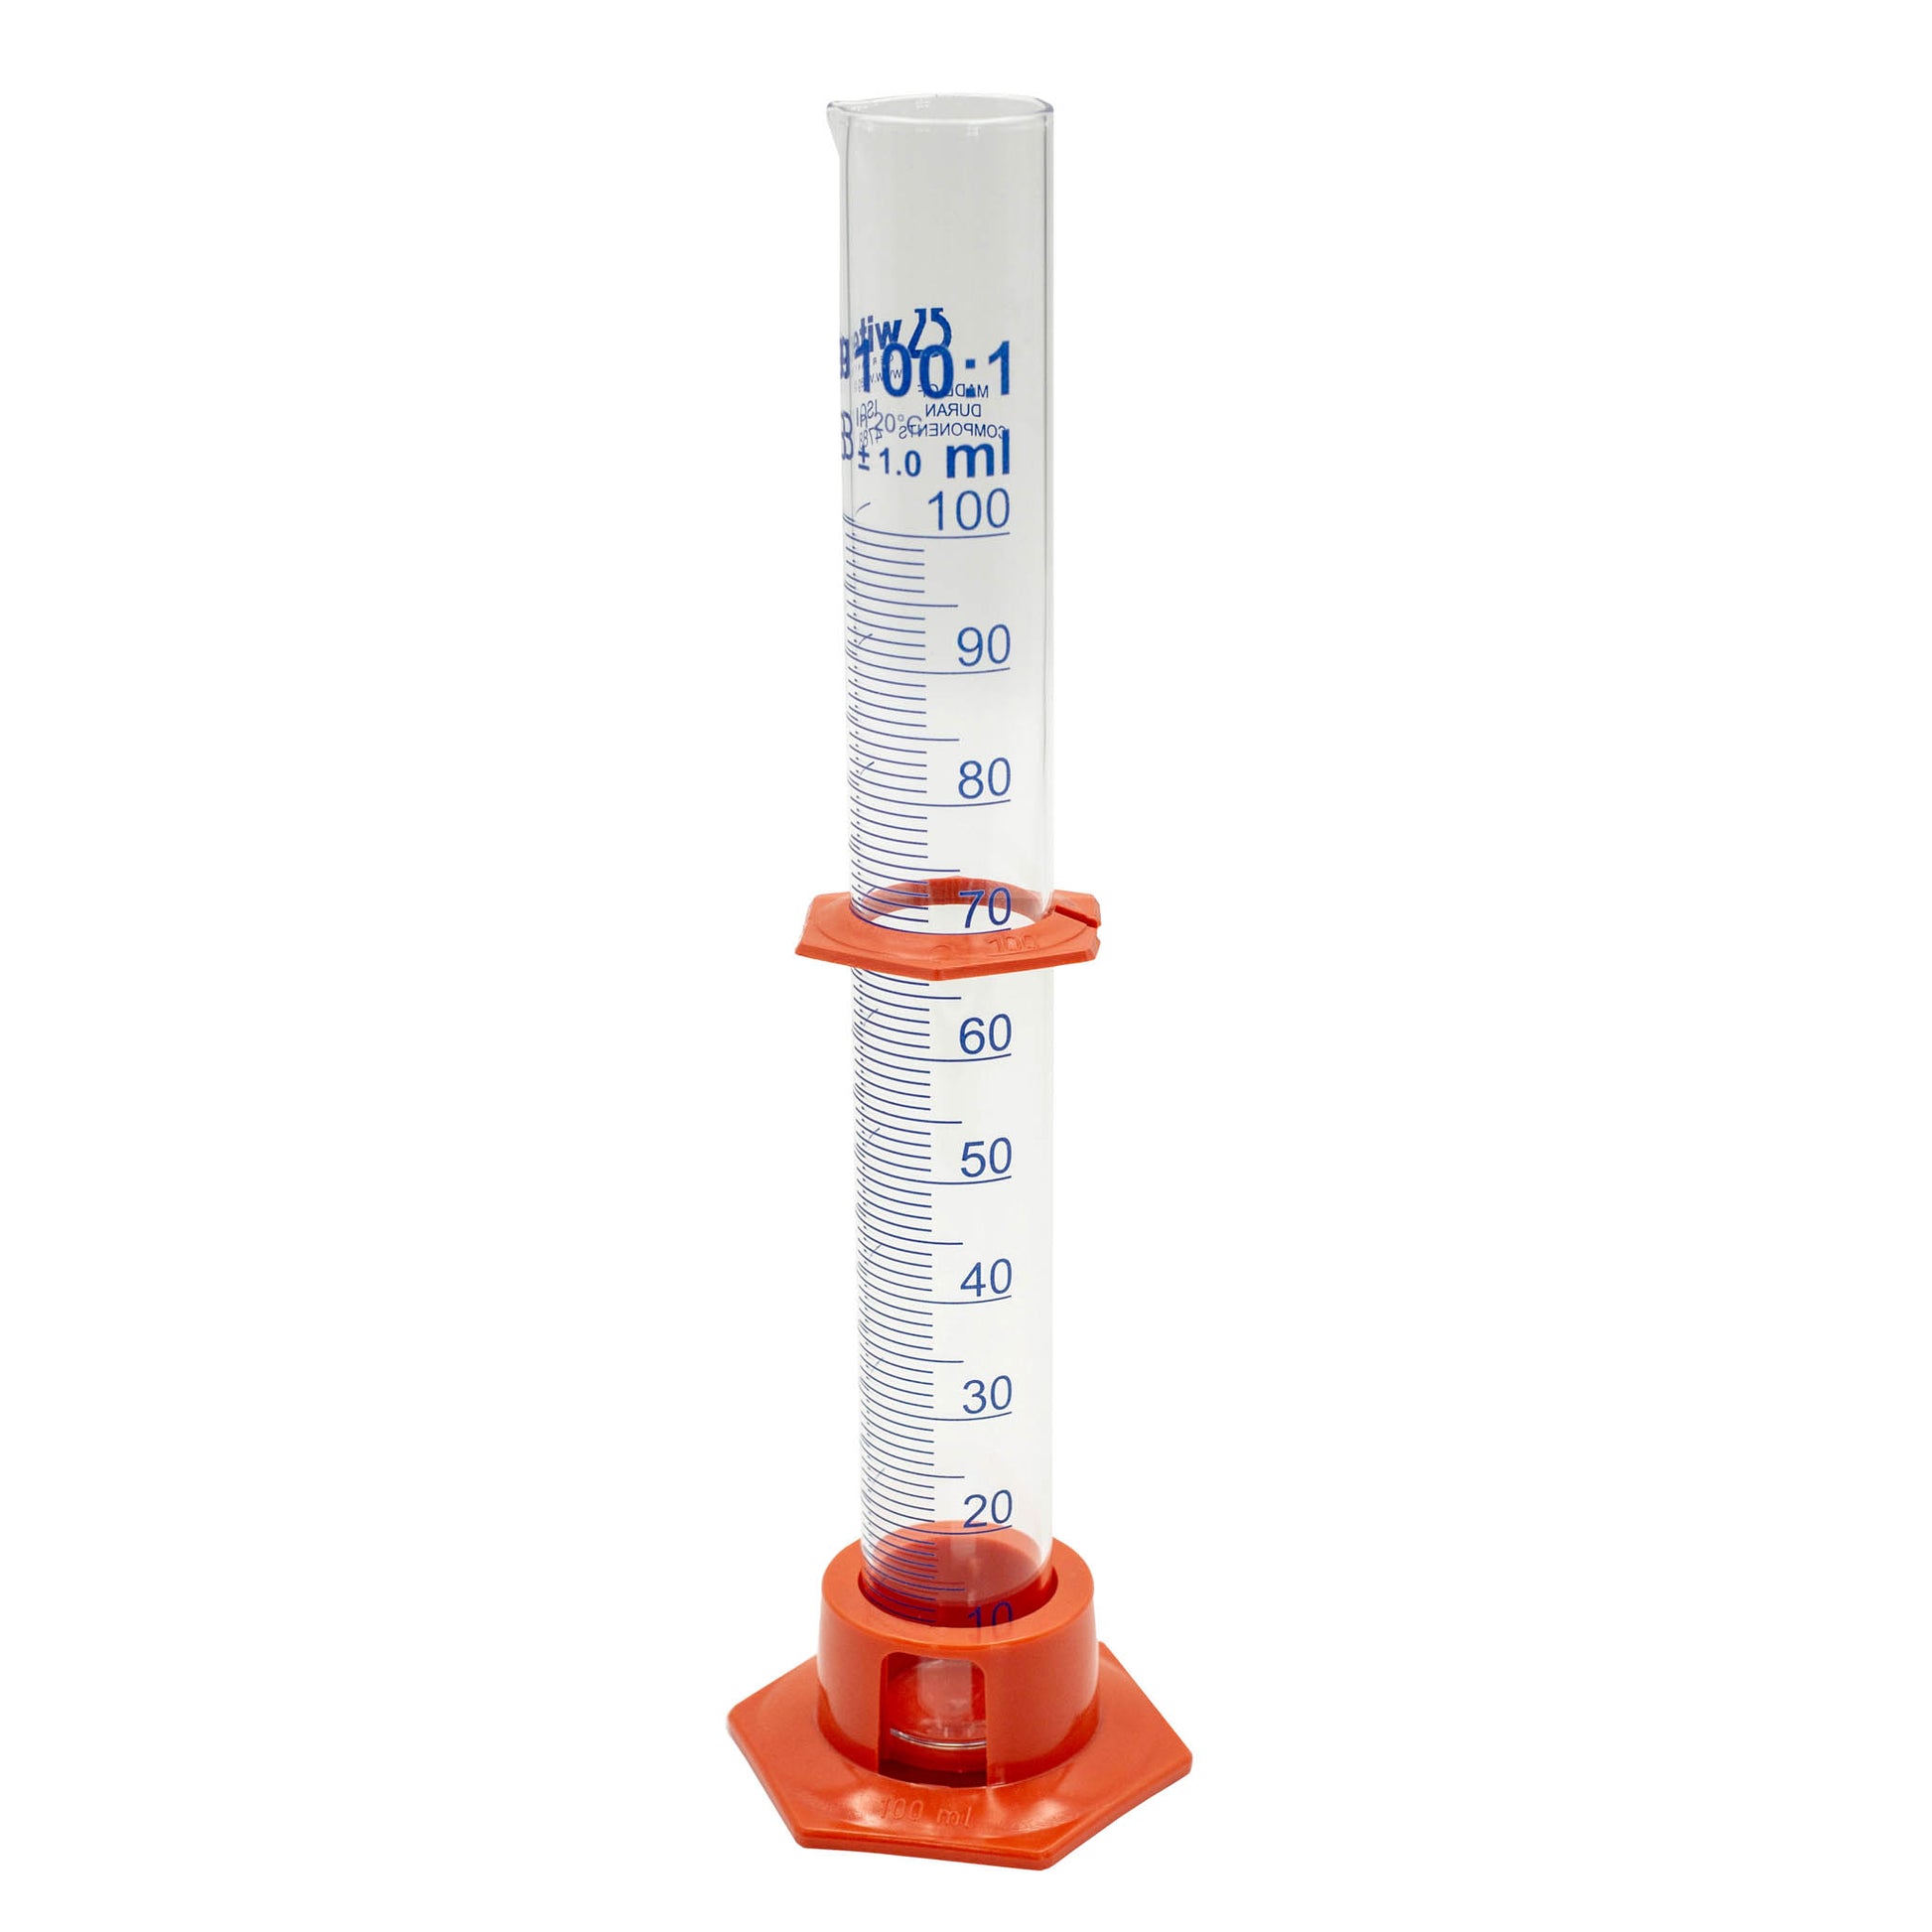 100ml glass measuring cylinder with plastic base and place holder. Measures in 1ml increments. 